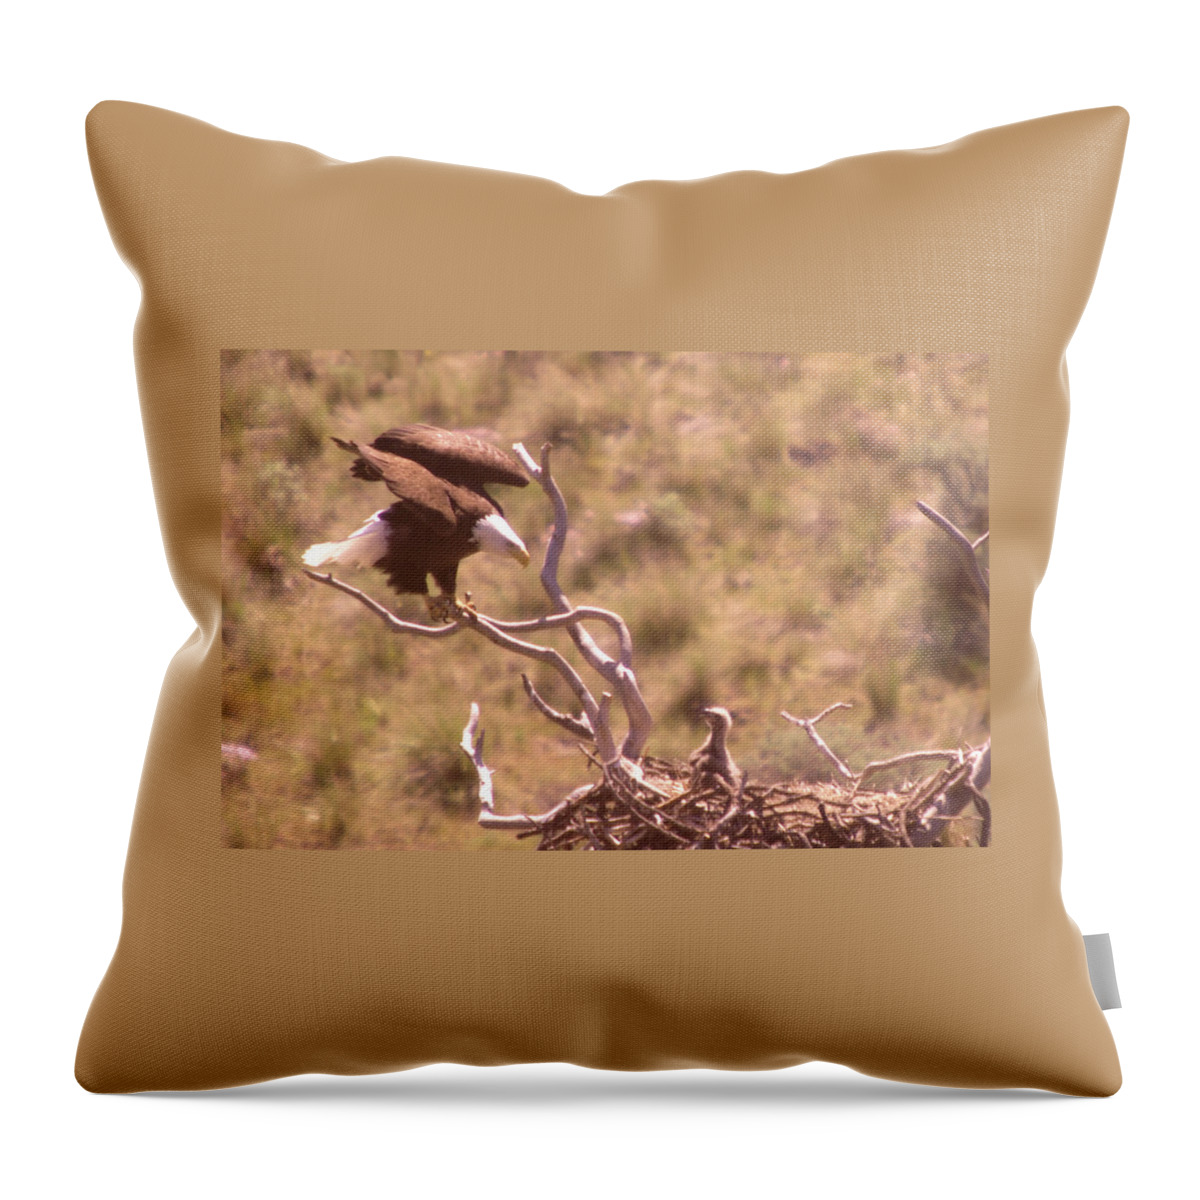 Eagles Throw Pillow featuring the photograph Adult Eagle With Eaglet by Jeff Swan